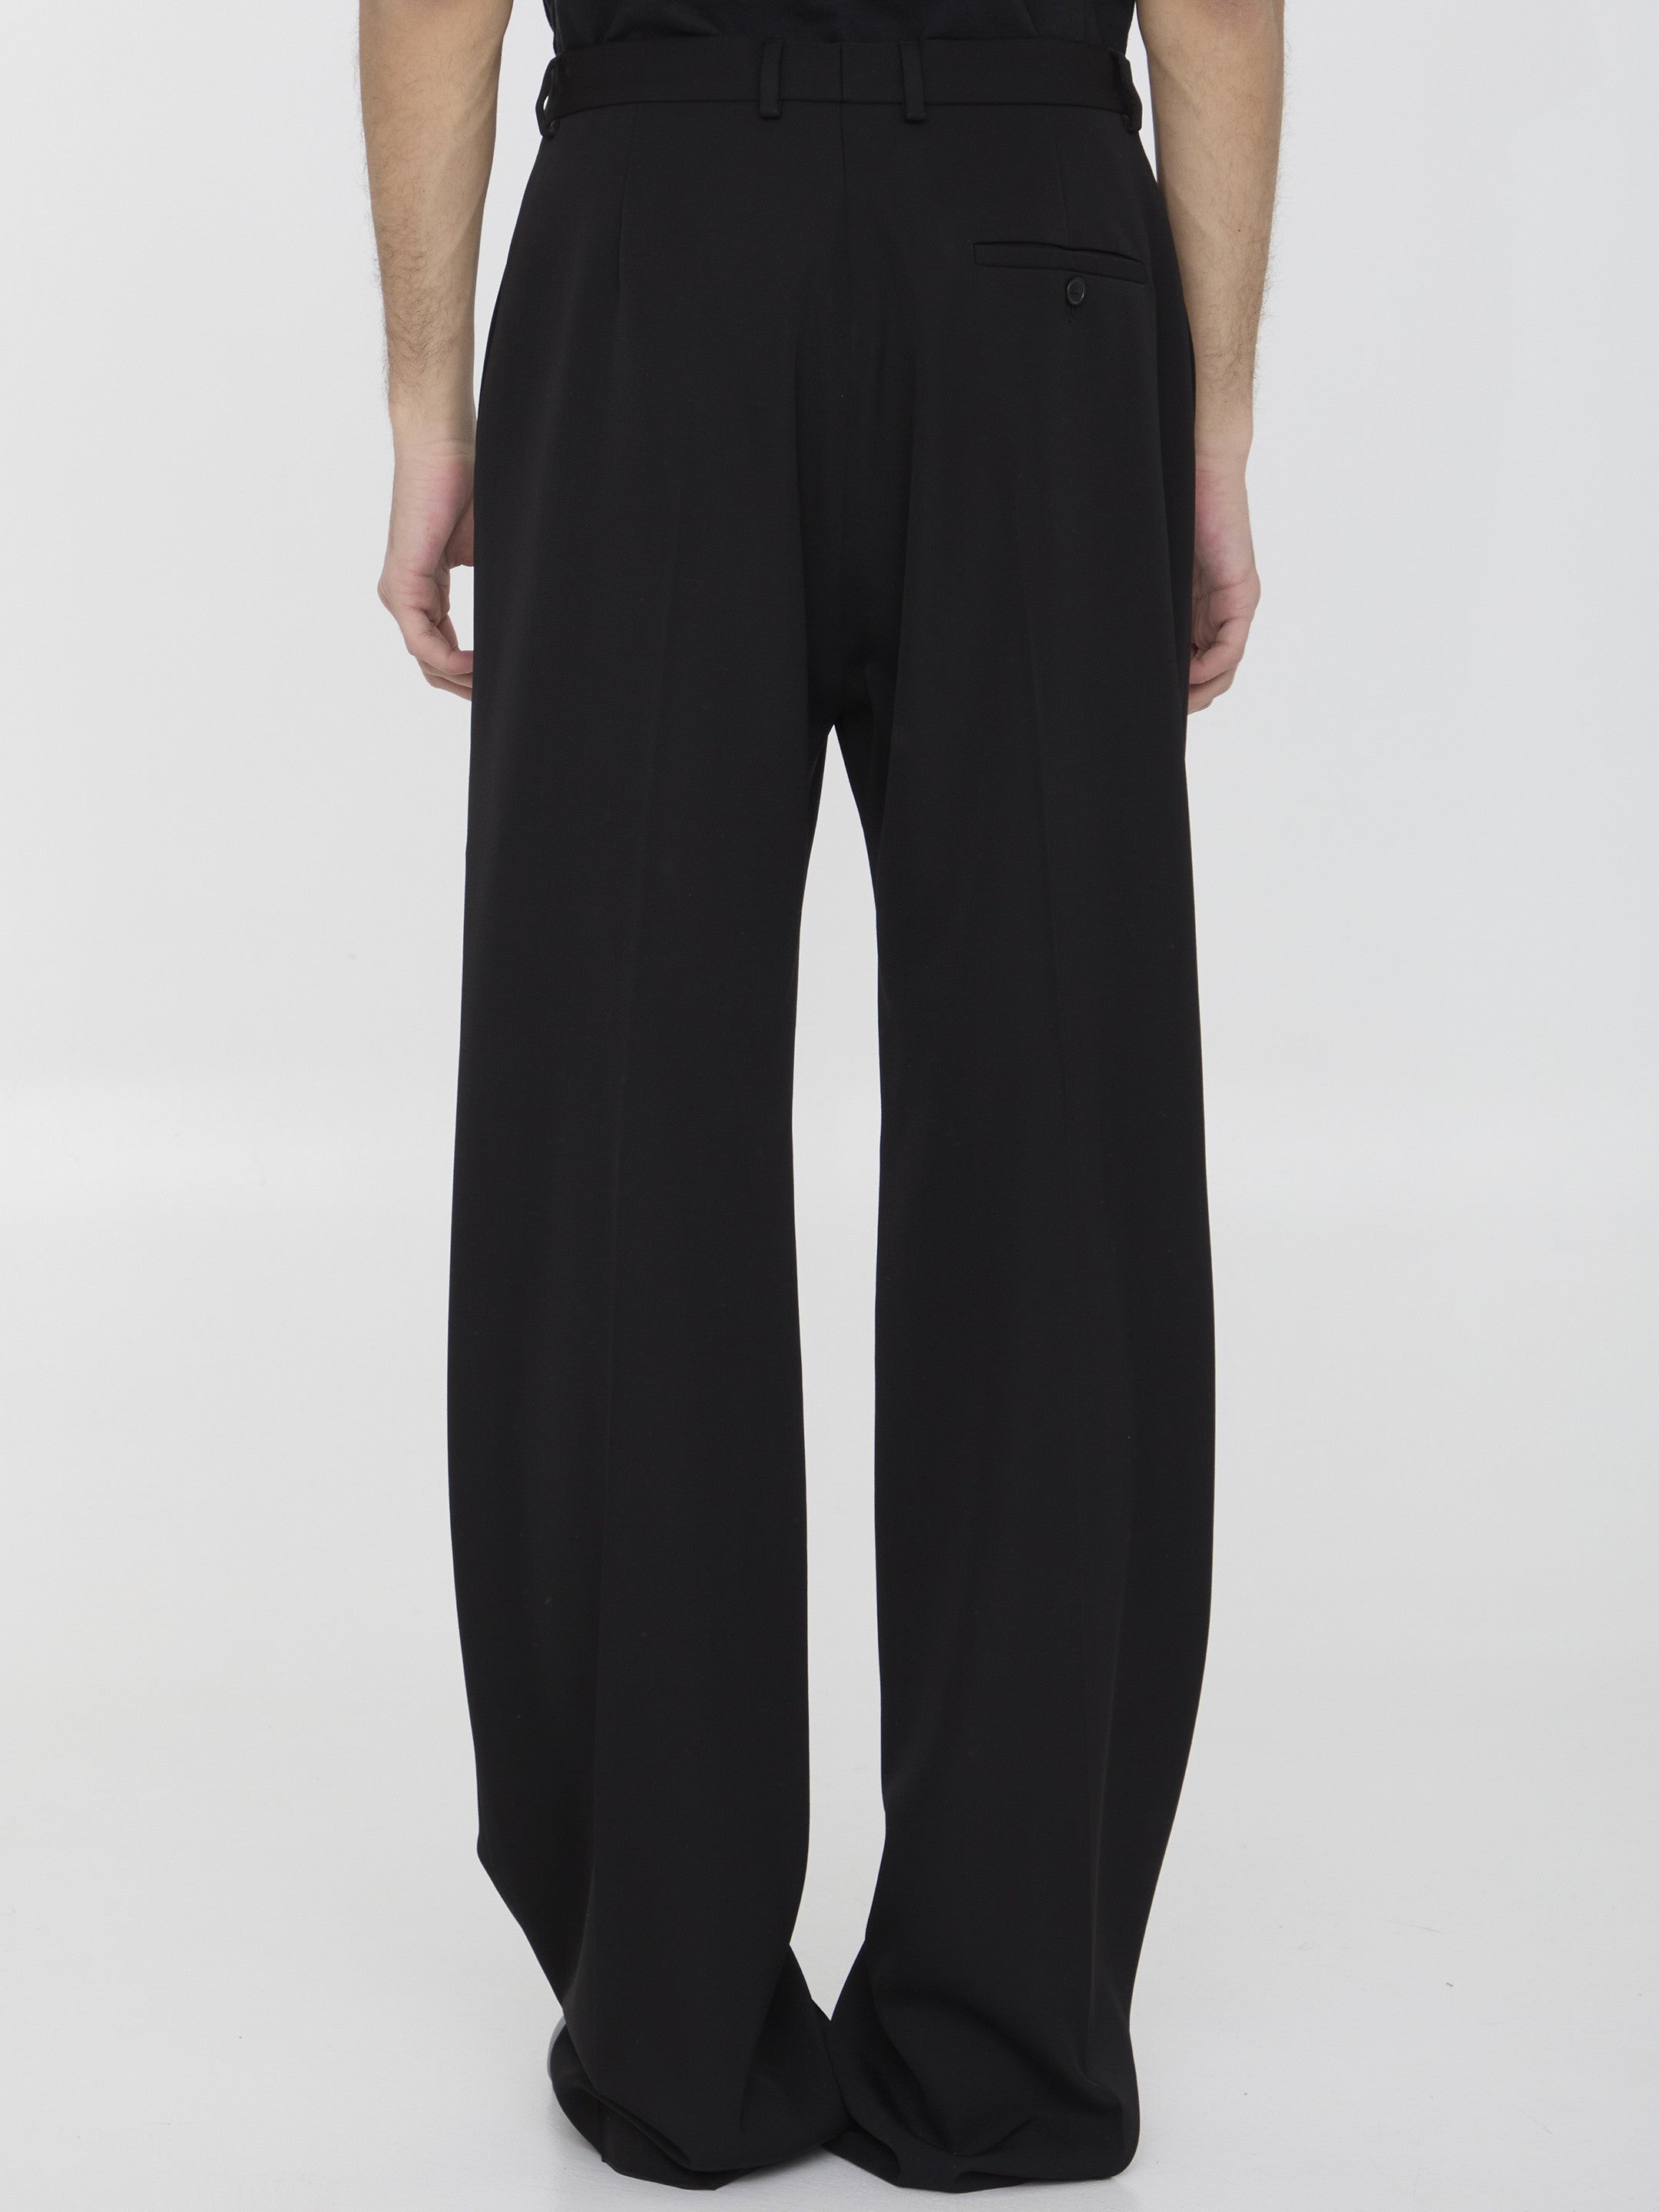 BALENCIAGA-OUTLET-SALE-Tailored-trousers-Hosen-S-BLACK-ARCHIVE-COLLECTION-4.jpg